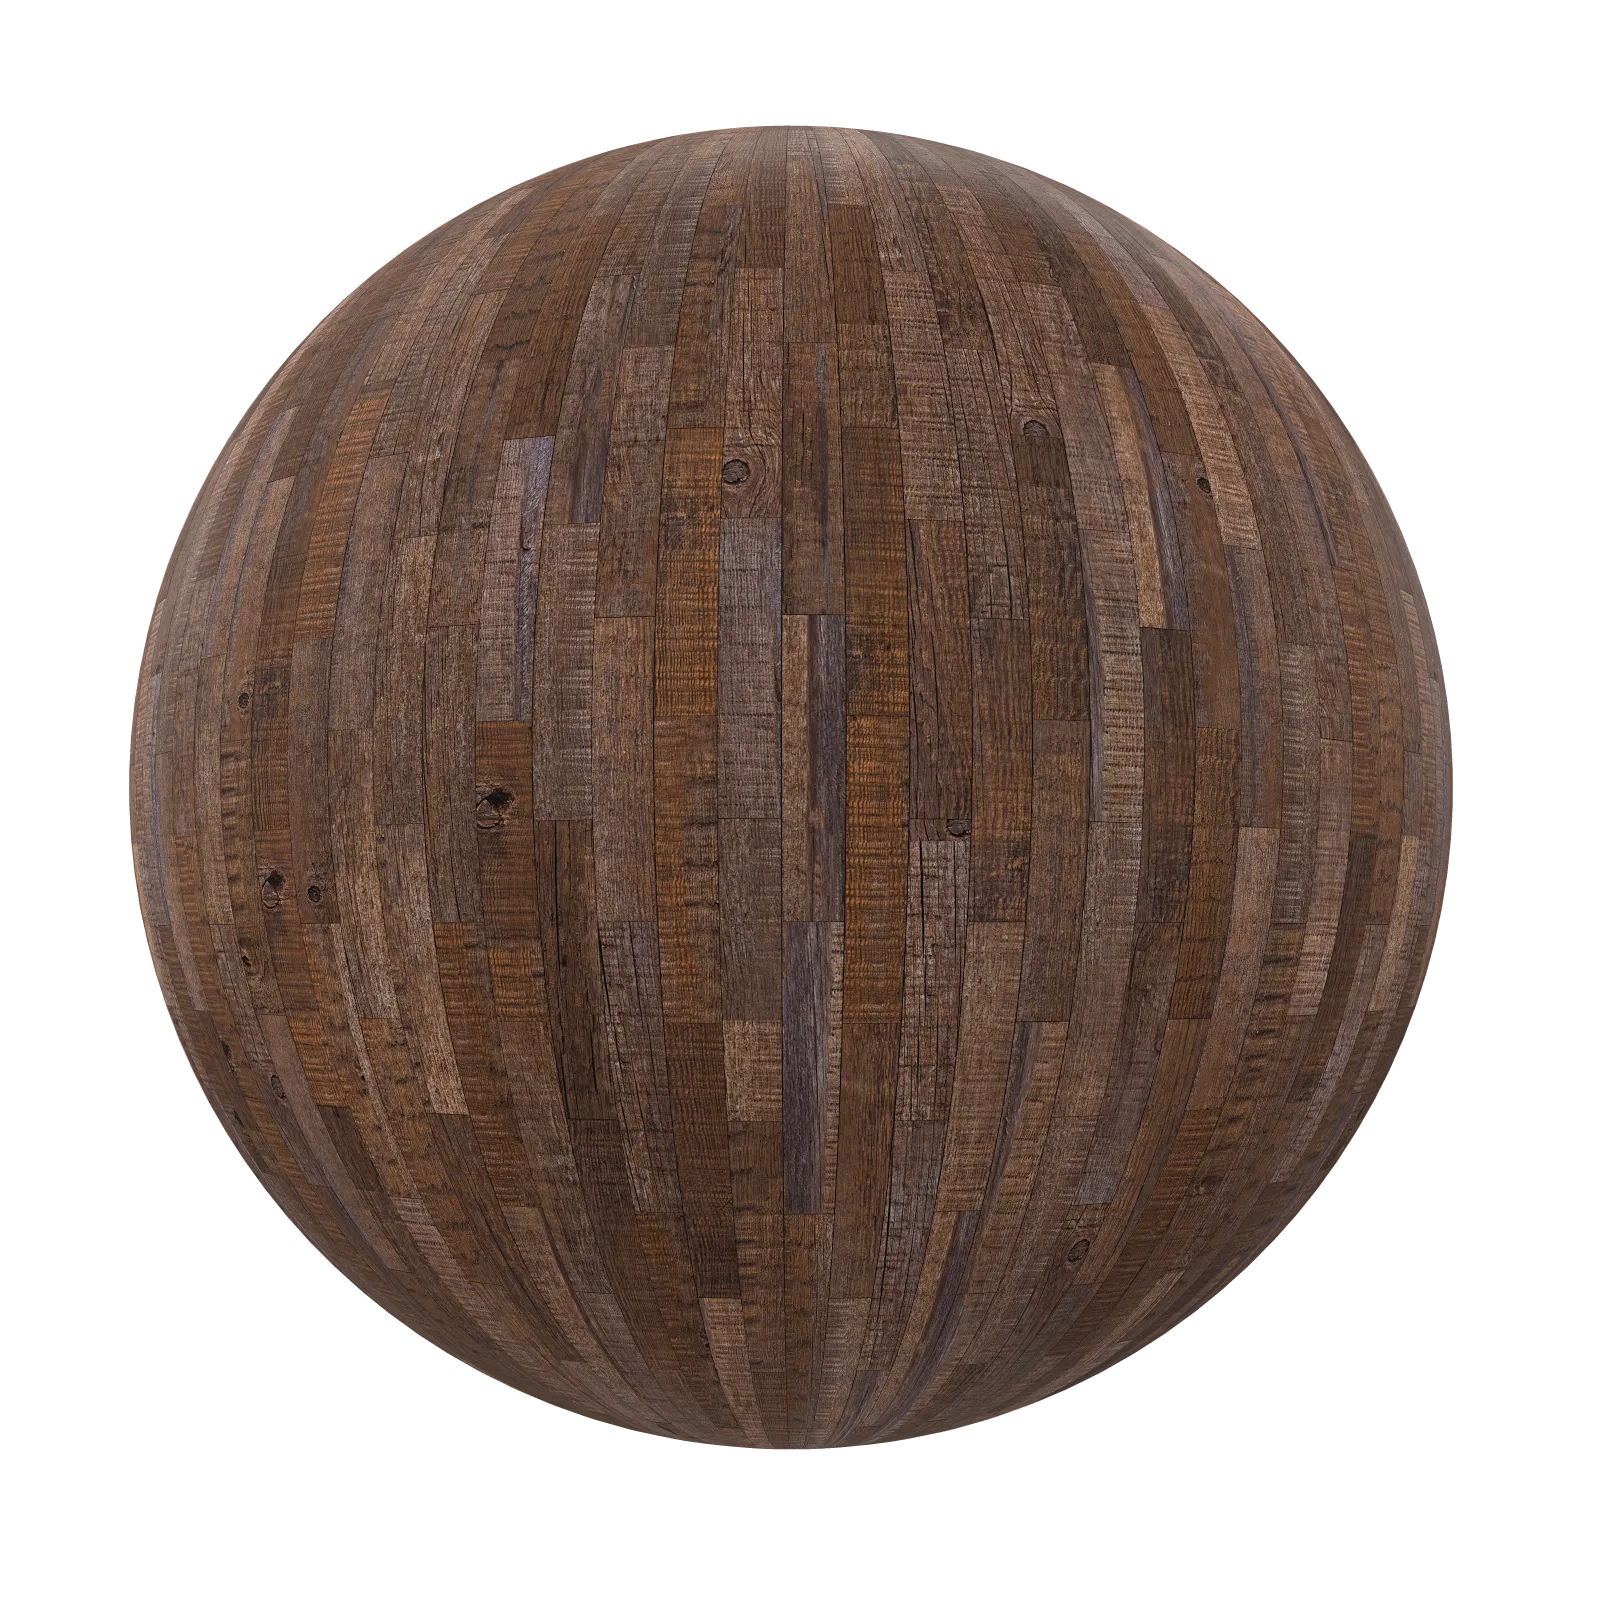 TEXTURES – WOOD – Old Wood Tiles 24